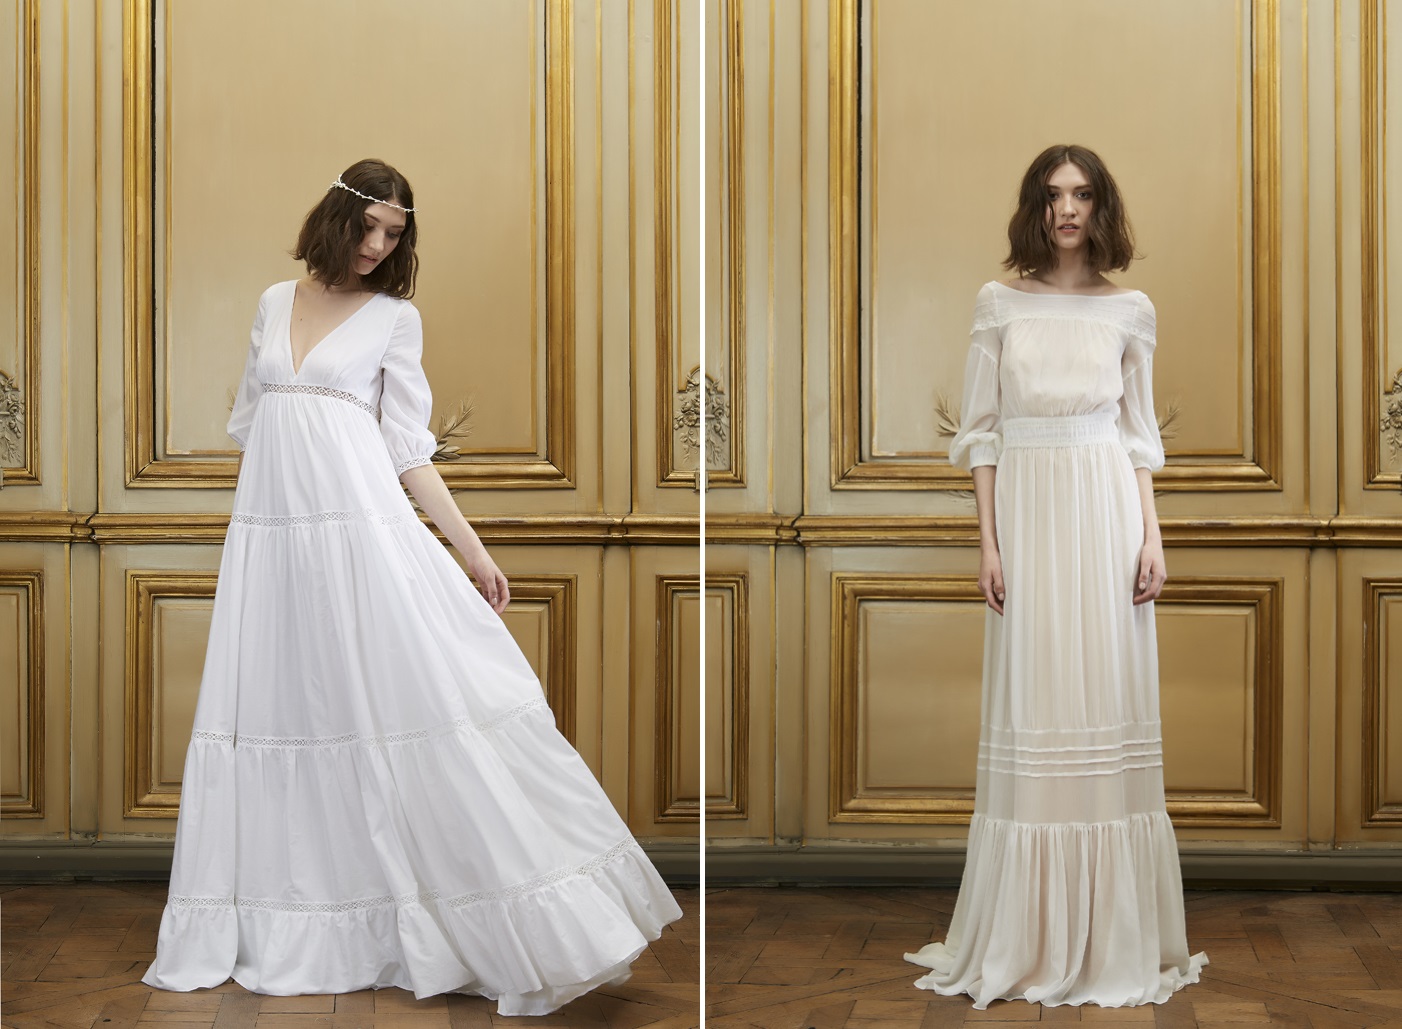 The 2015 Bridal Collection from Delphine Manivet - Boho Wedding Dresses